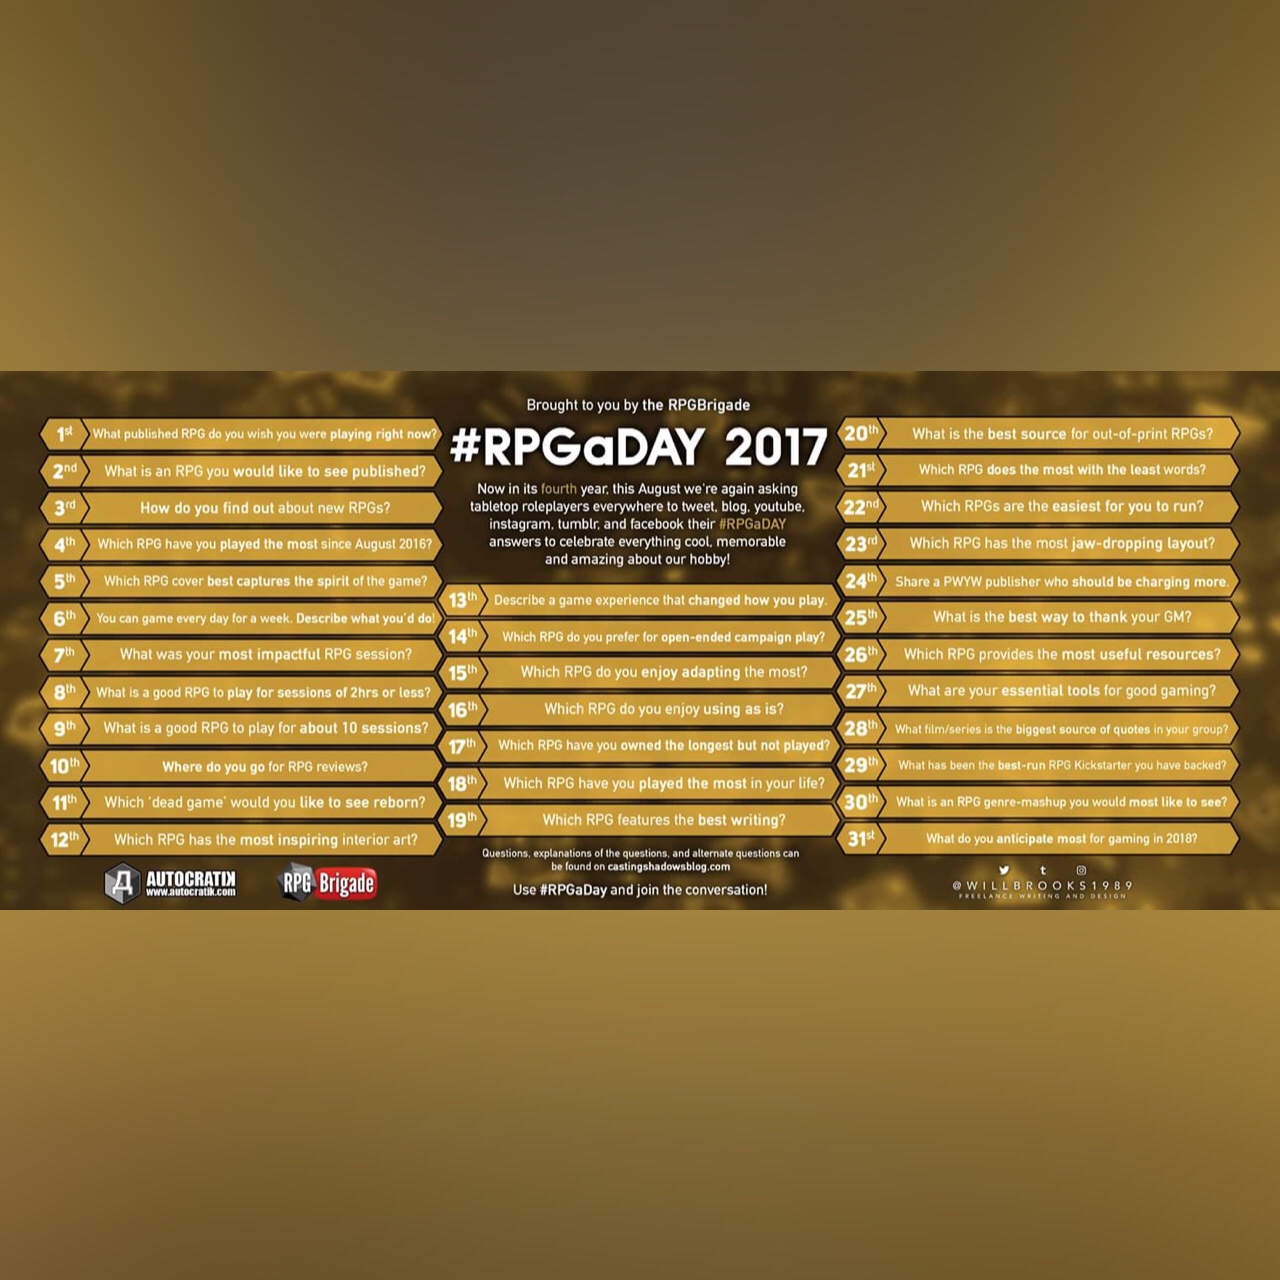 RPGaDAY 2017 August 28 What film or series is the most-frequent source of quotes in your group?